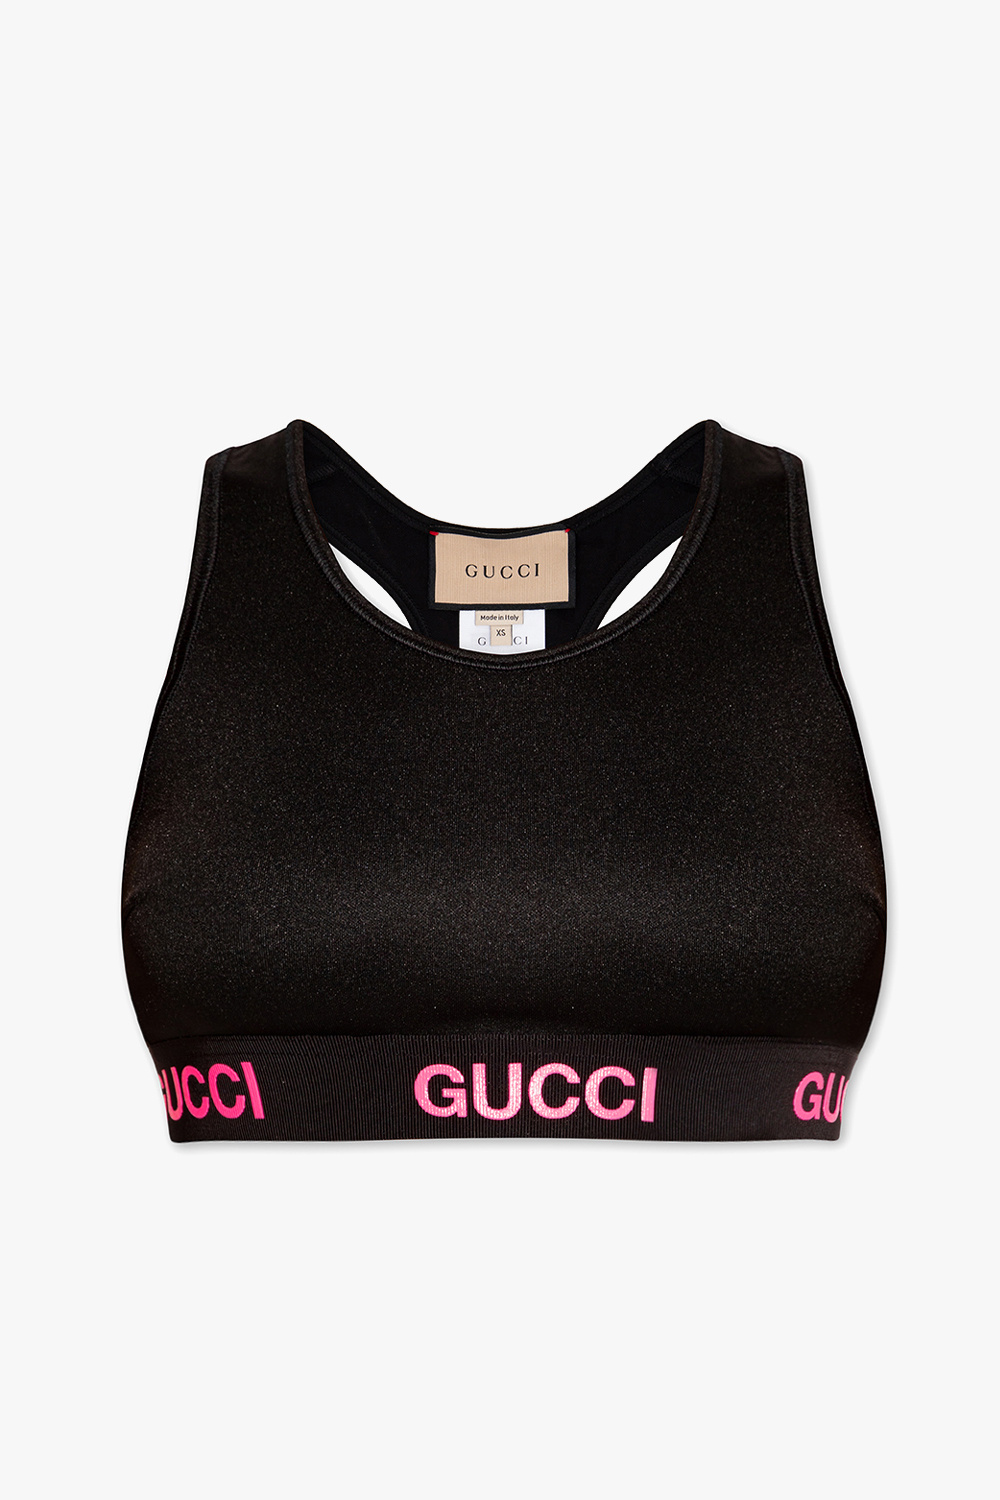 Gucci - 615523_CAO0G  Top-notch Collections Of Designer Apparel